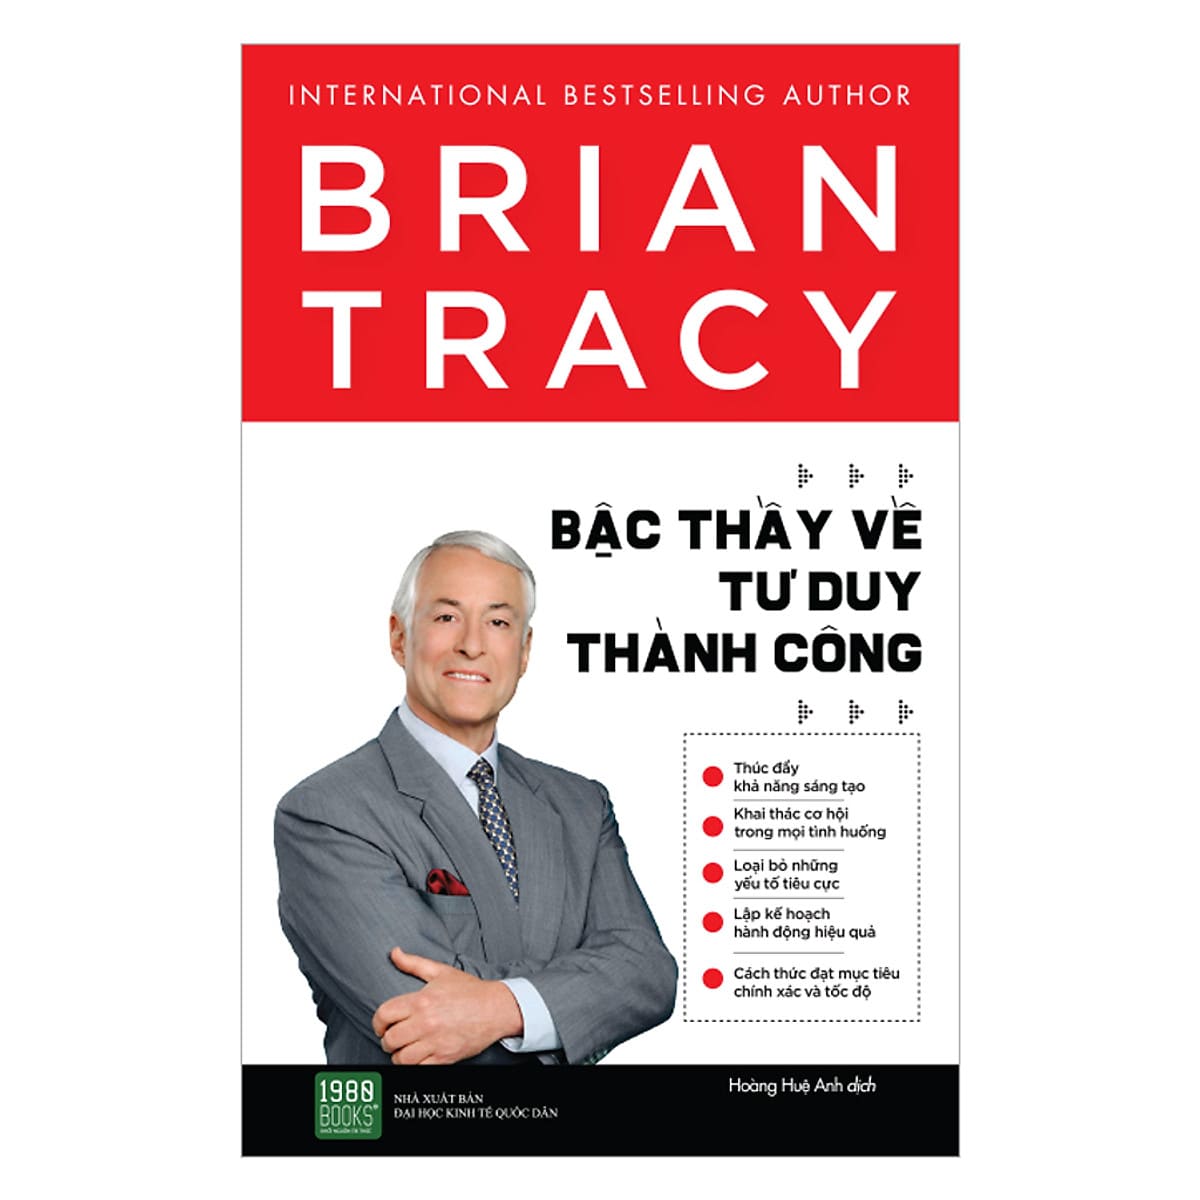 09 - Brain Tracy - Bac thay tu duy thanh cong-min